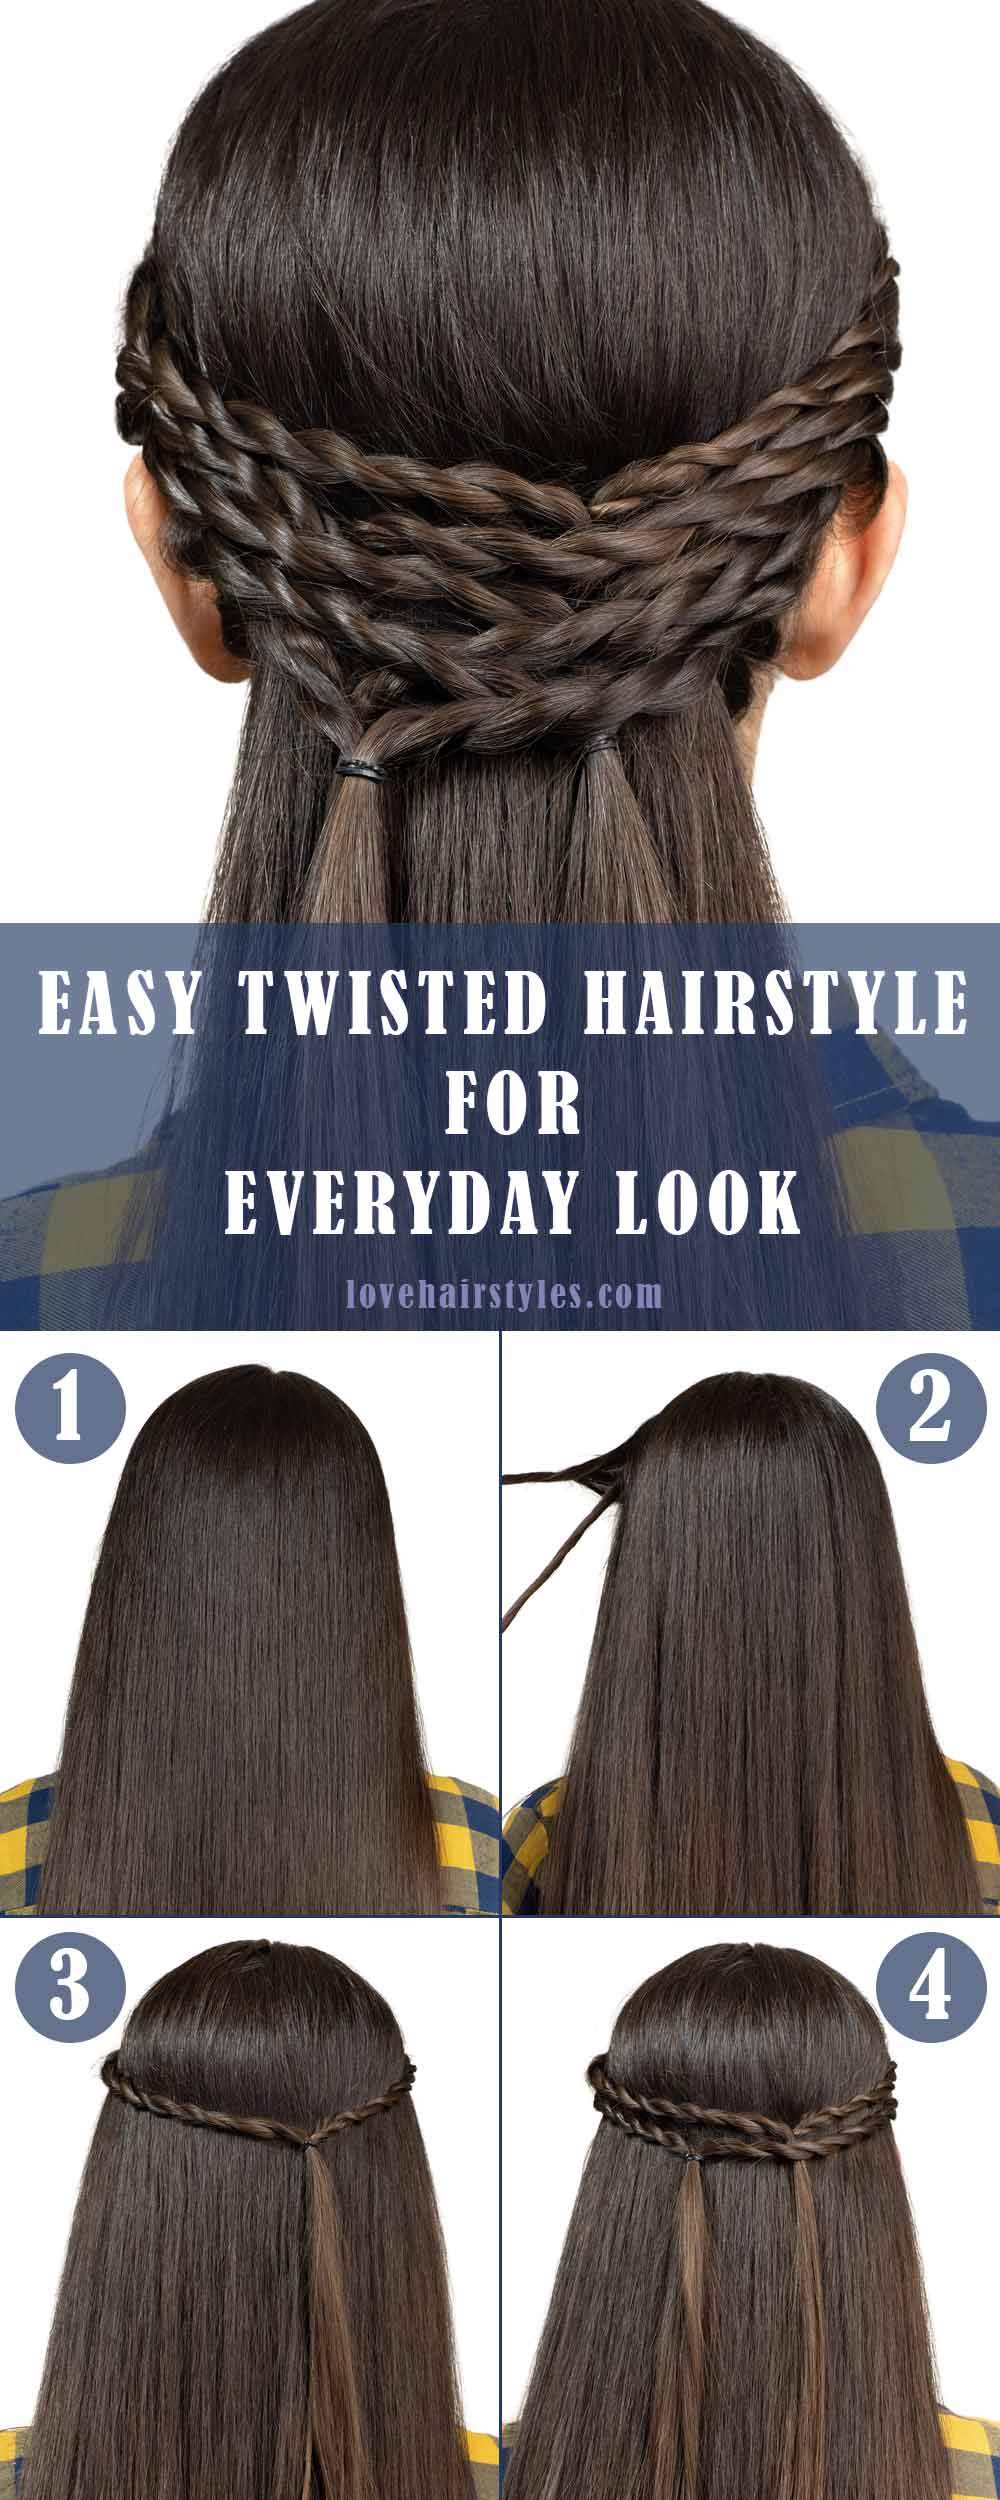 Easy Twisted Hairstyle for Medium Hair or Long Hair